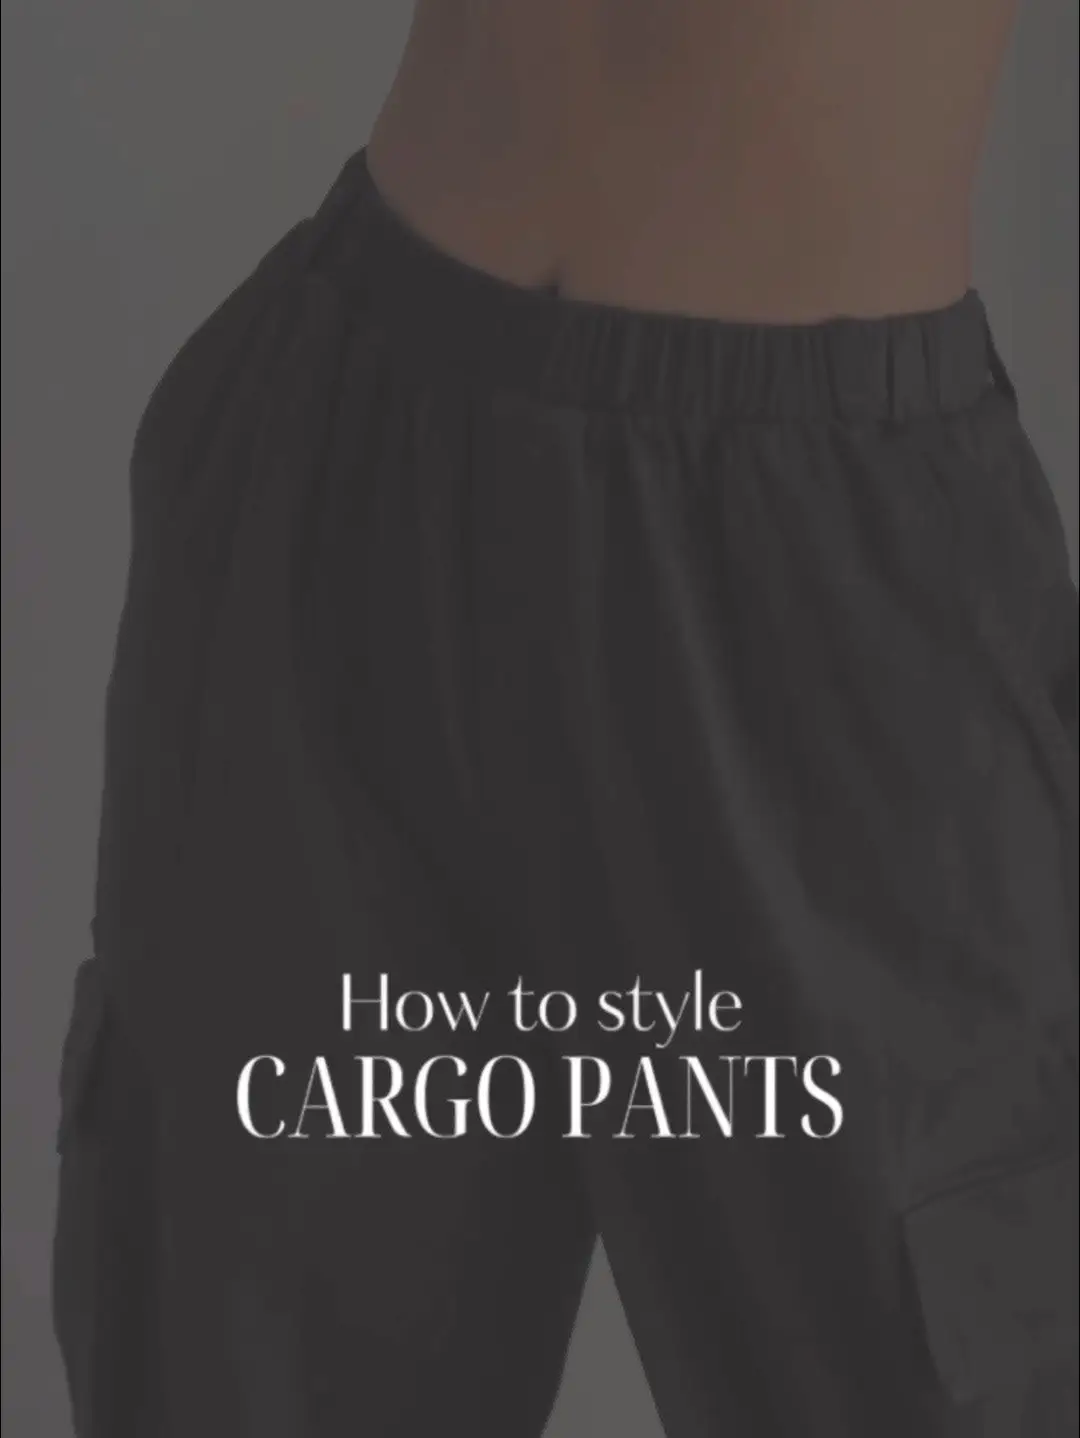 Cargo pants, here to stay!, Video published by Alejandra